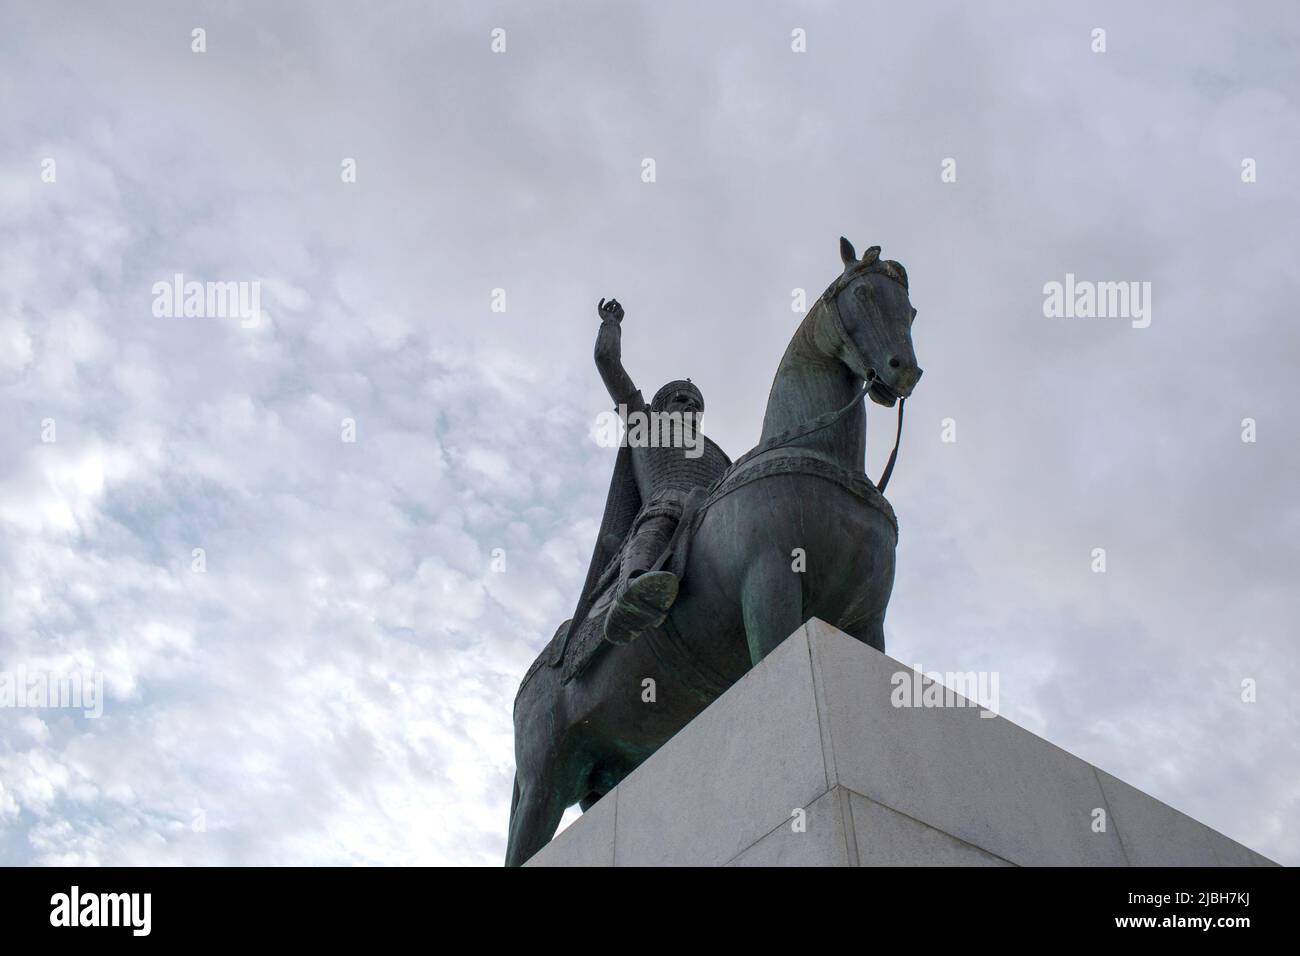 Statue of the Last Byzantine Emperor (Constantine XI Palaiologos) riding a horse, located at the seaside of Palaio Faliro, Athens, Greece Stock Photo